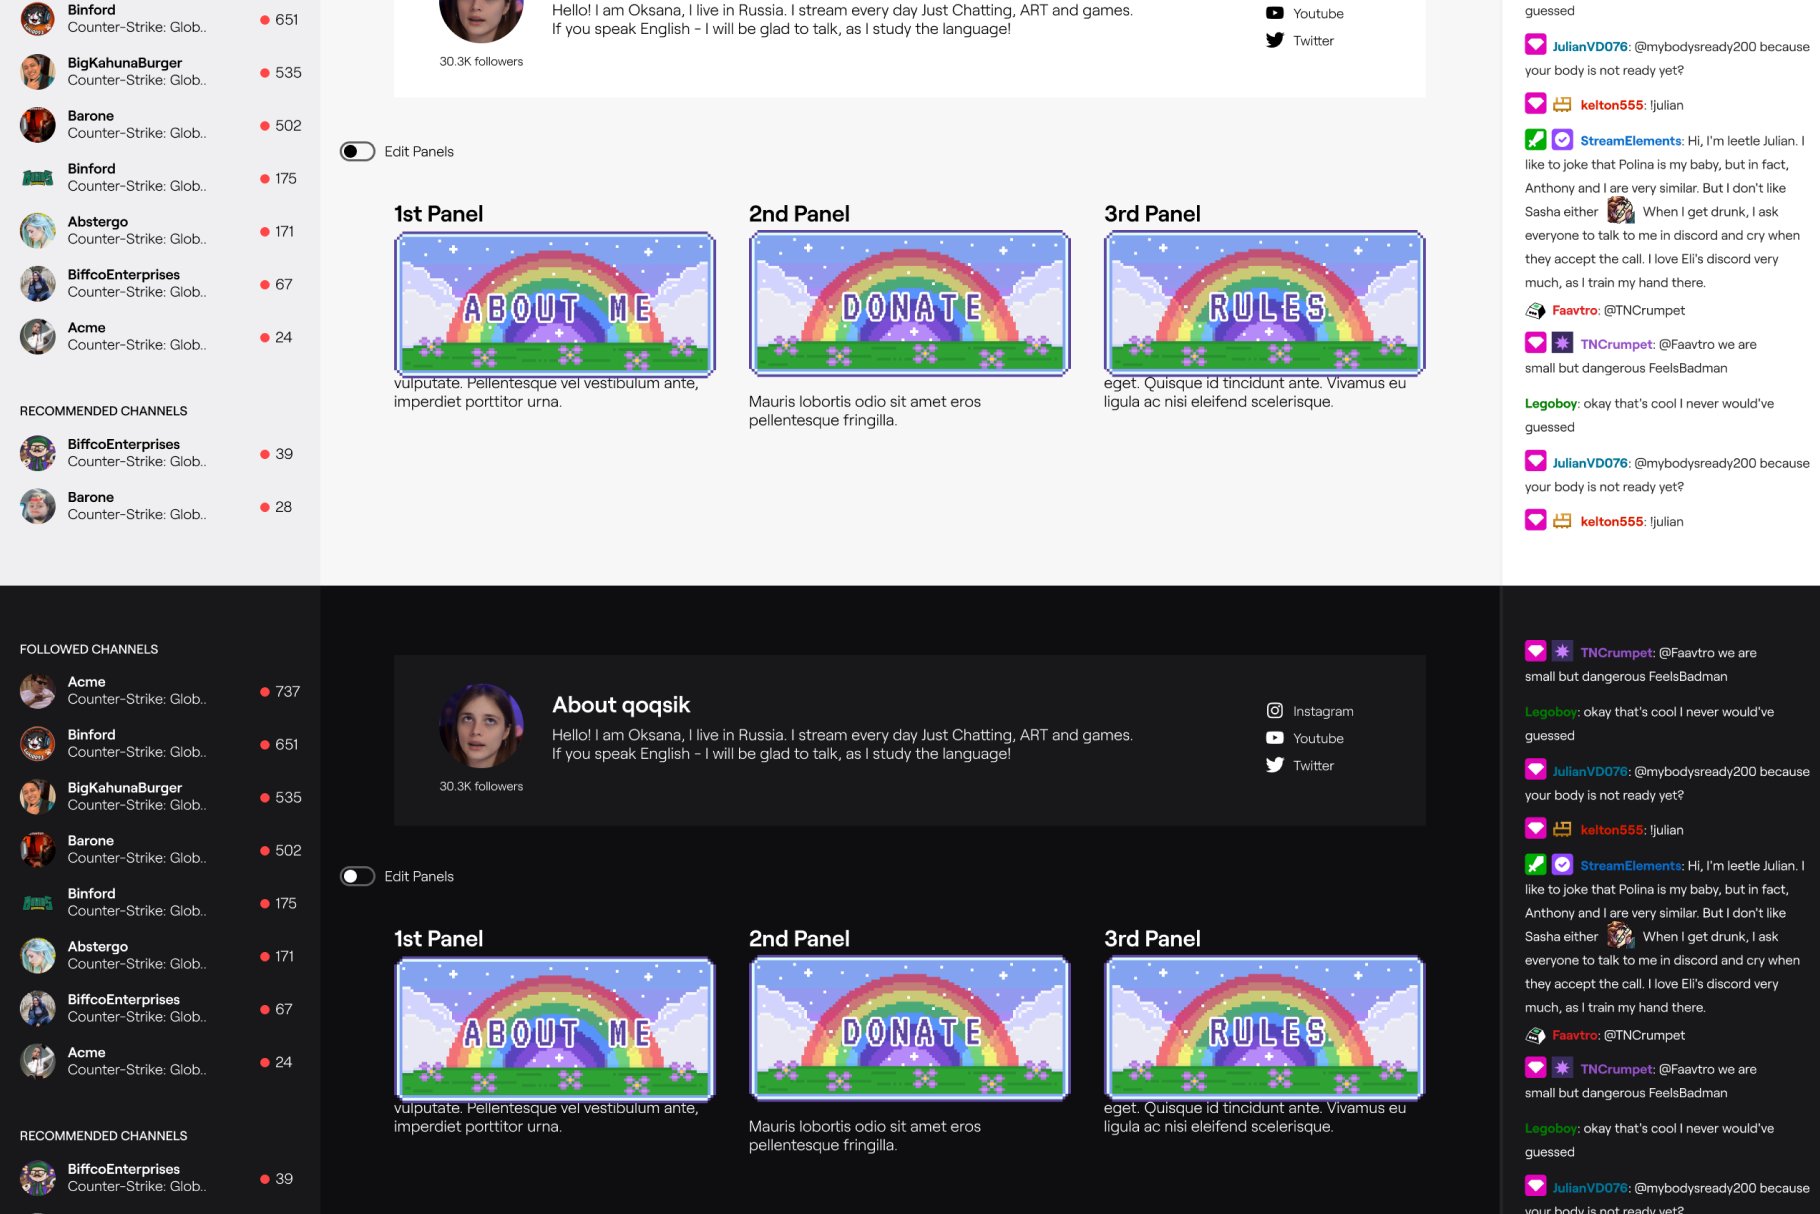 74x Rainbow Pixel Panels for Twitch preview image.